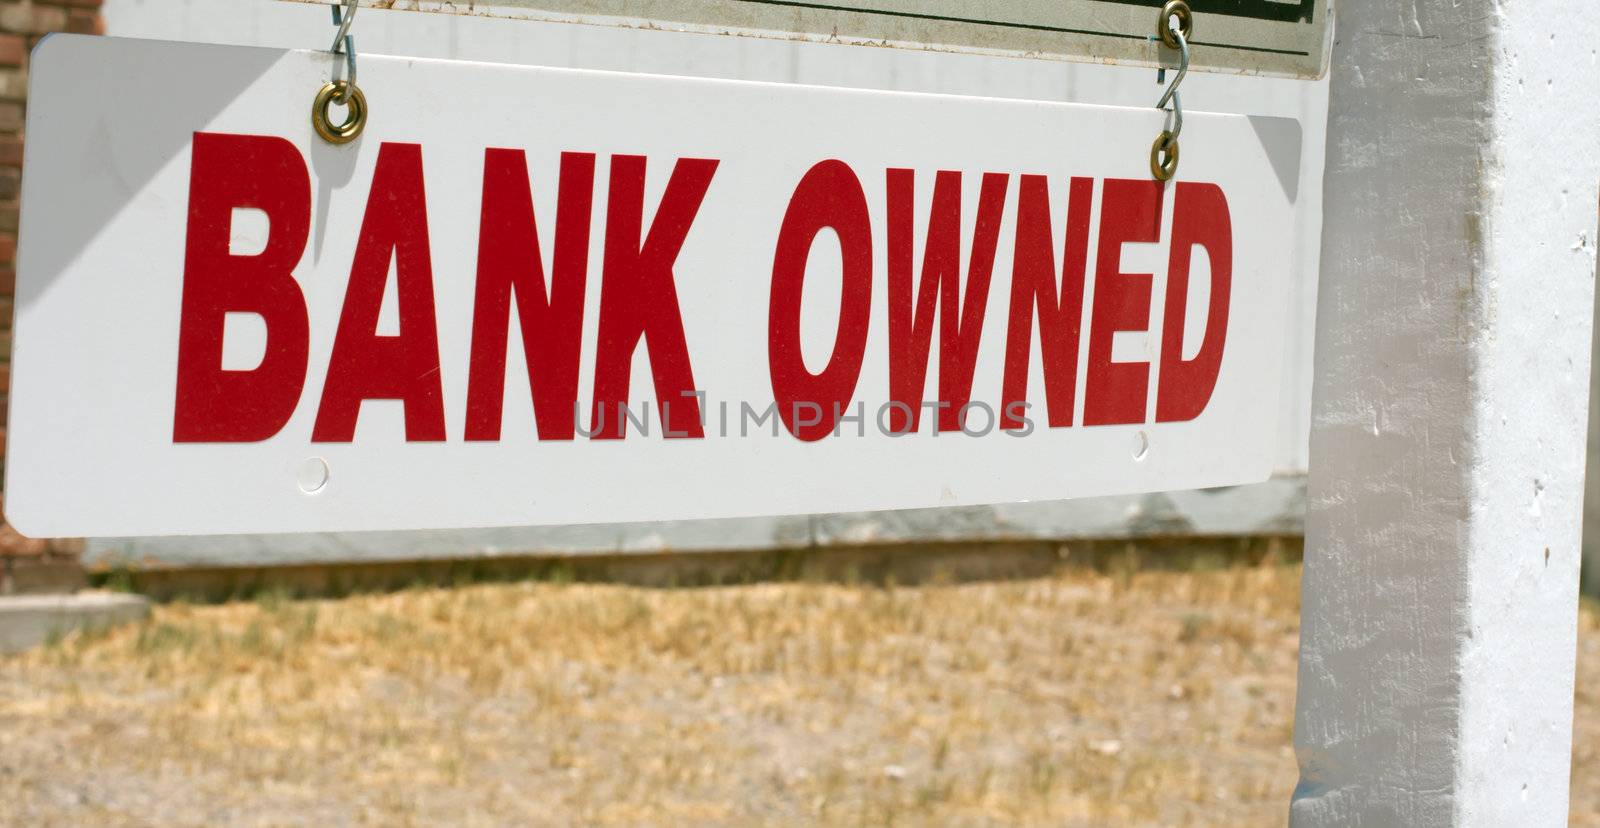 Bank owned real estate sign by GunterNezhoda